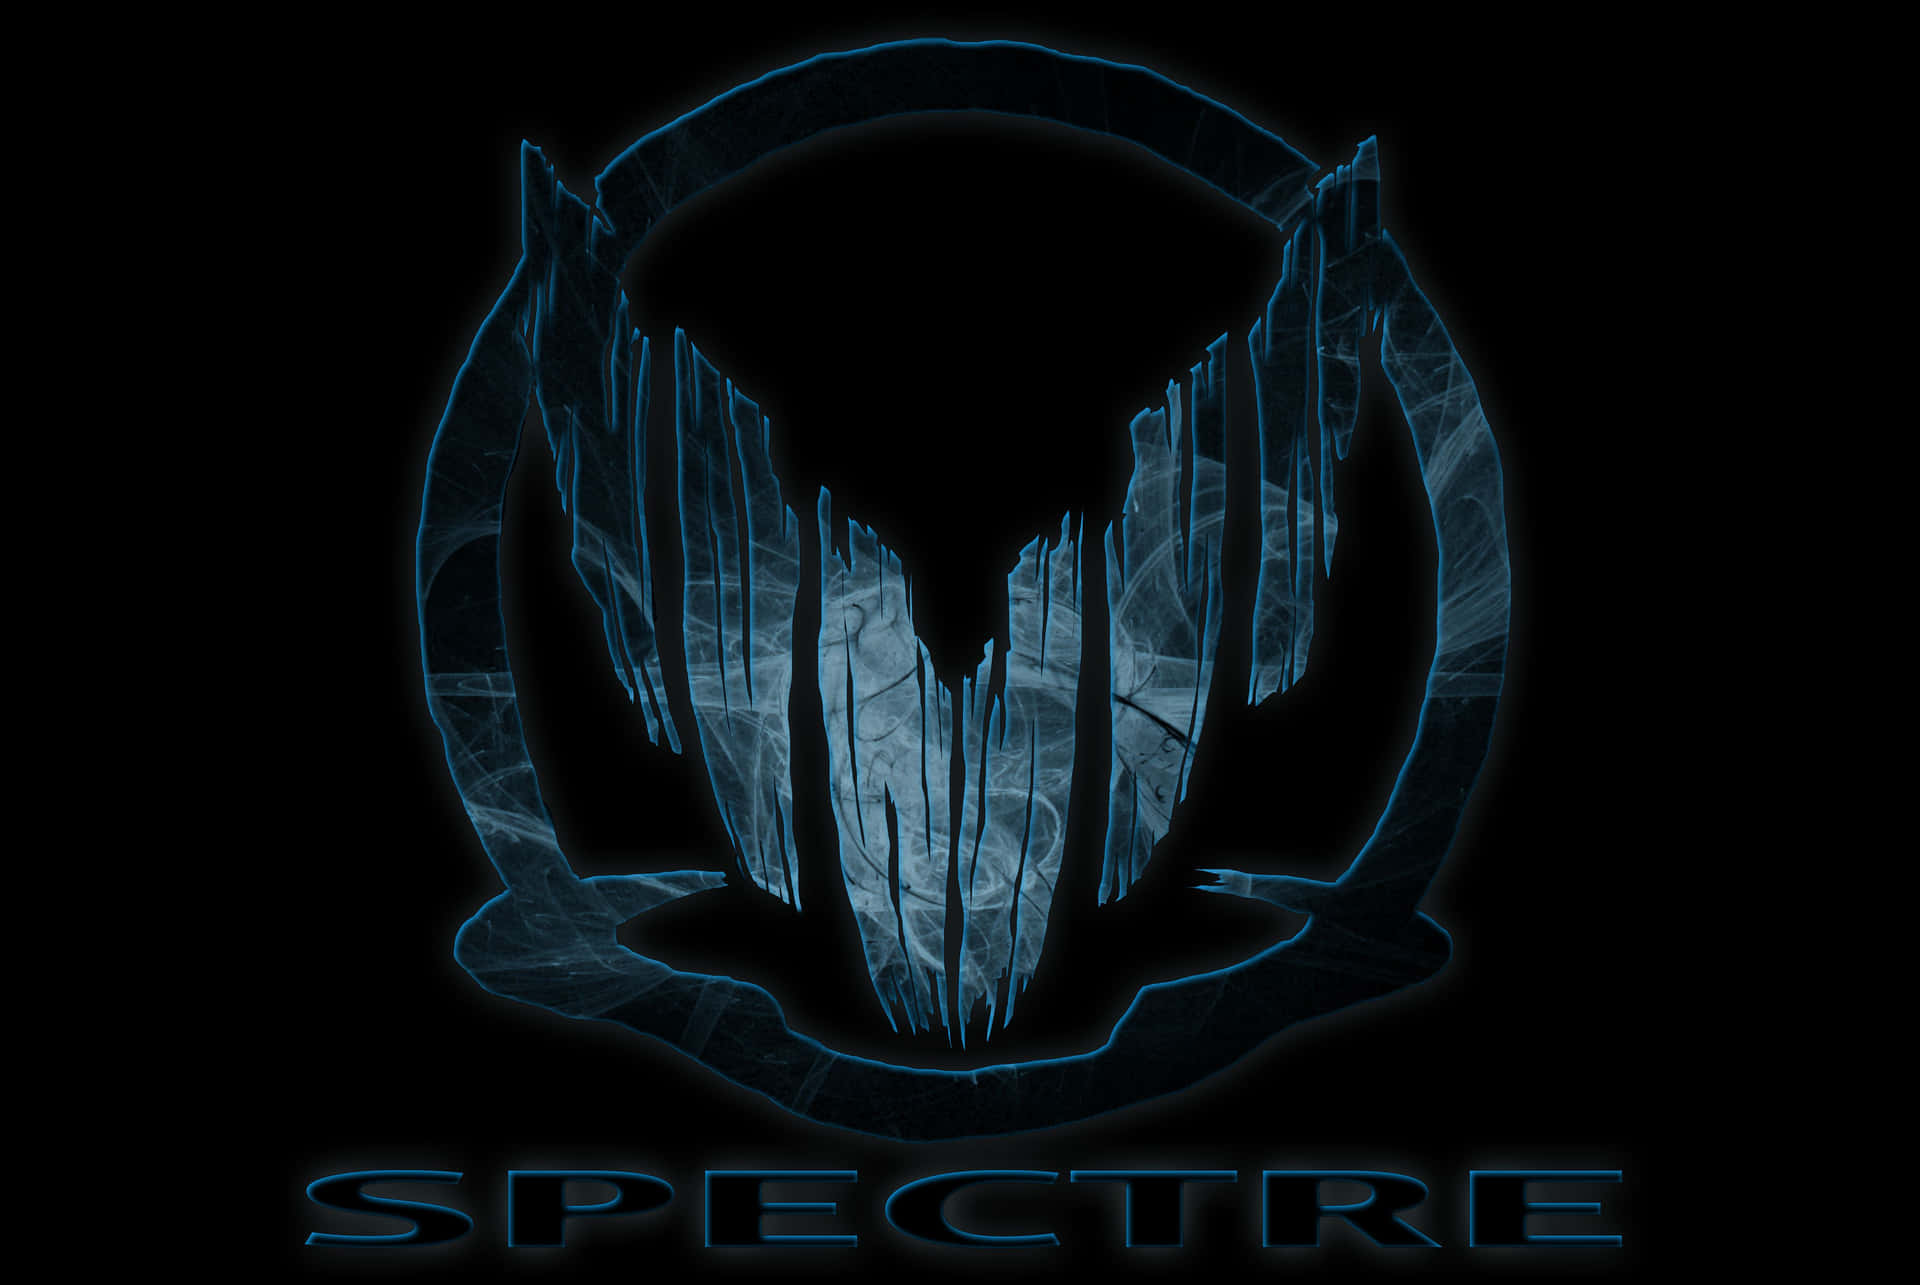 Spectre From Mass Effect In Dramatic Pose Wallpaper